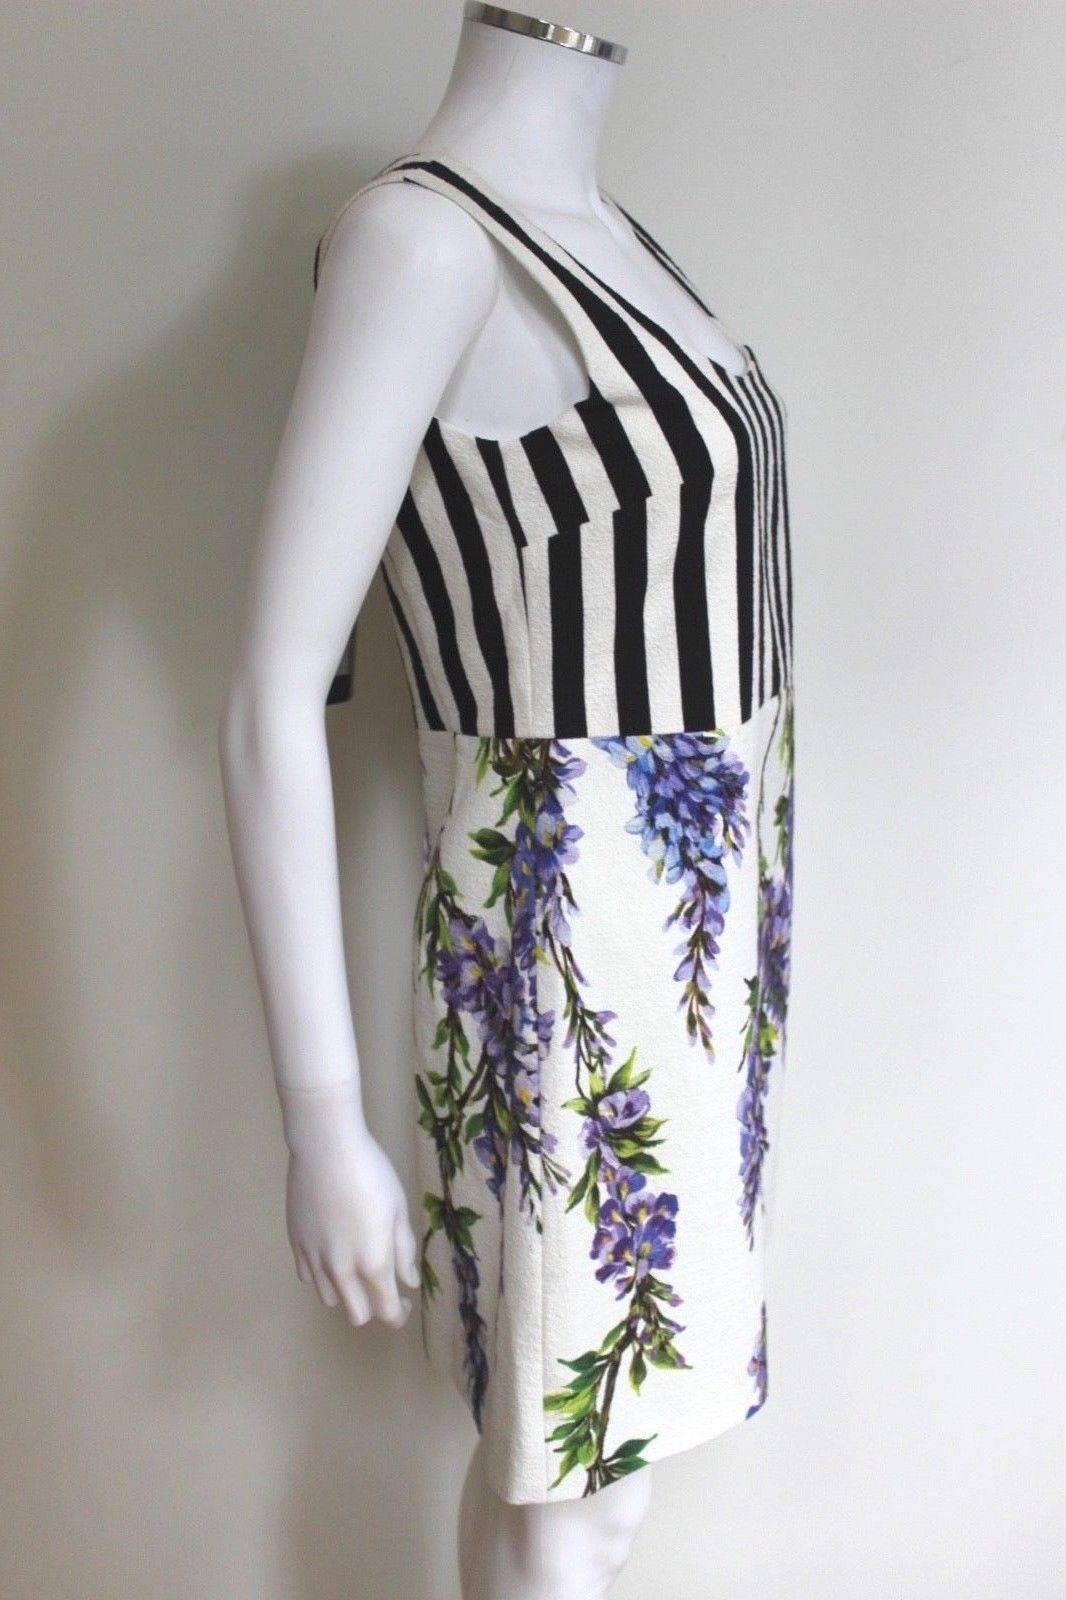 New Dolce and Gabbana White Striped Wisteria Floral Mini Dress 40 UK 8   In Excellent Condition For Sale In London, GB